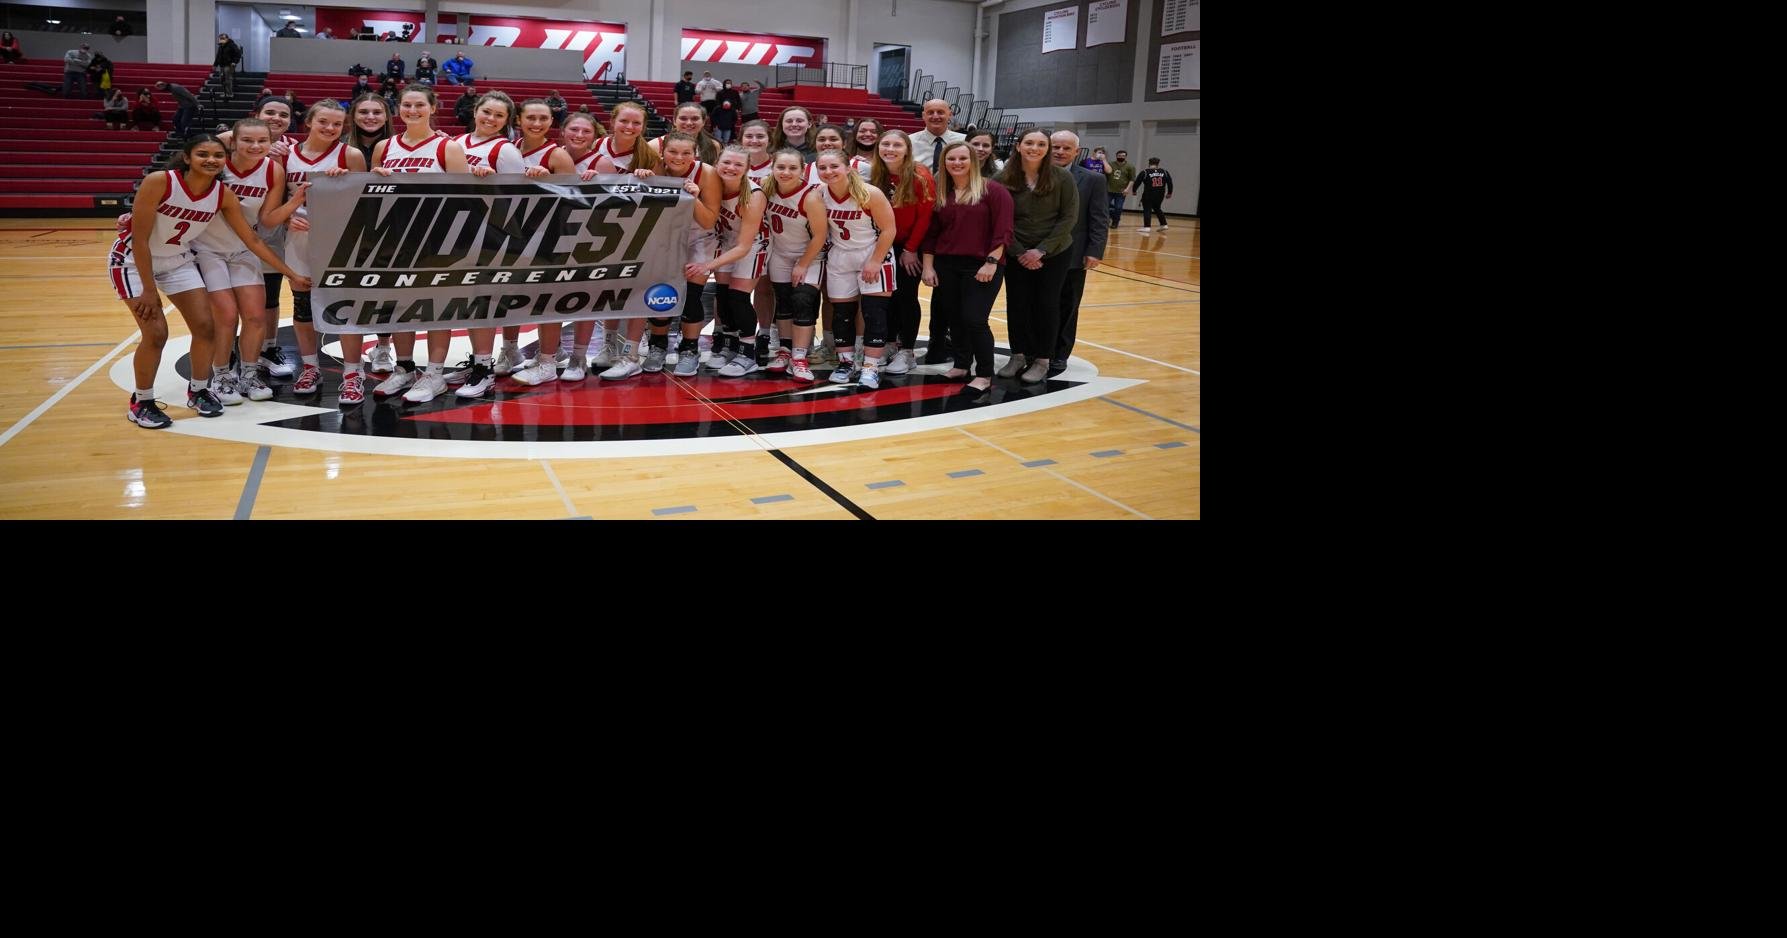 Four peat Ripon College women's basketball team clinches at least a